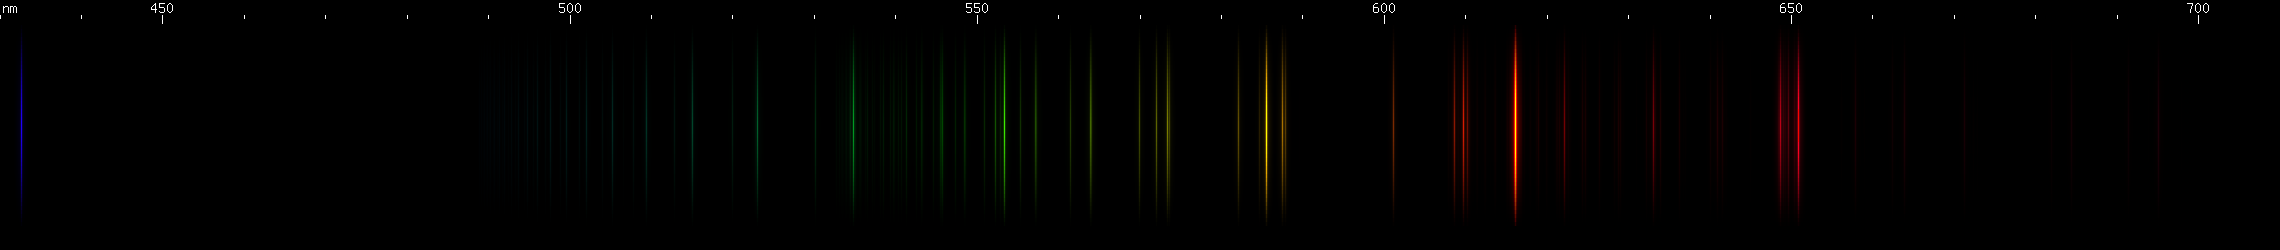 Spectral lines of Francium.